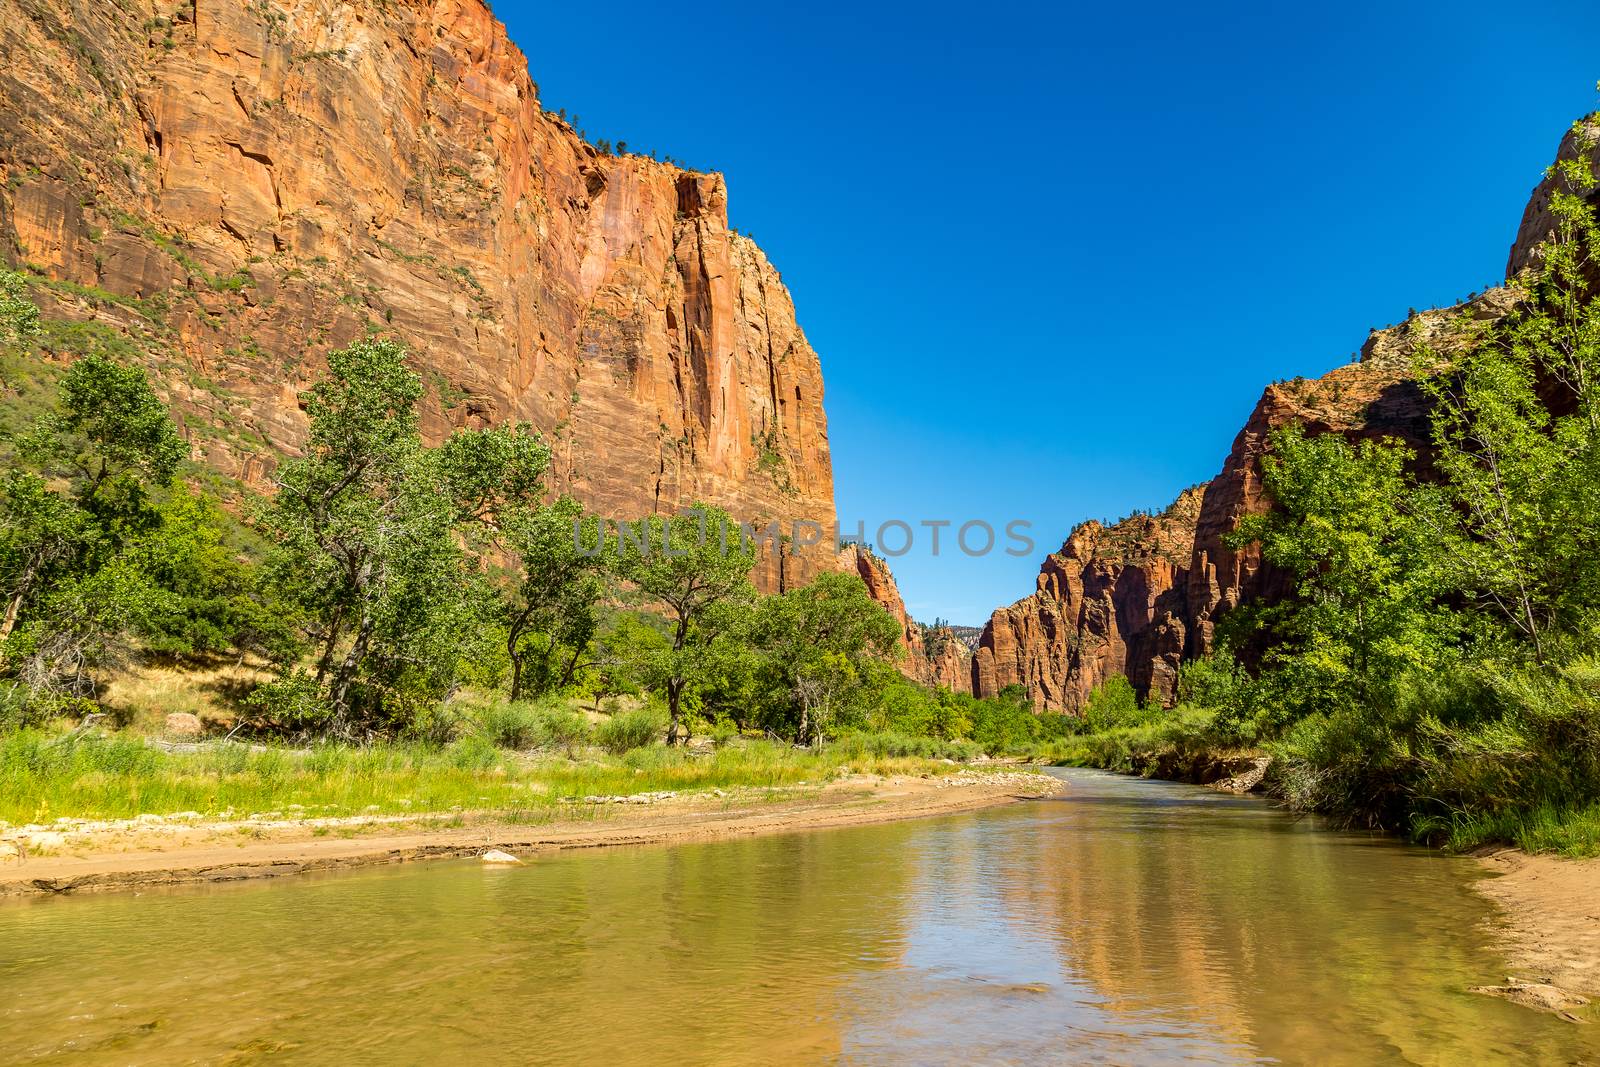 Zion National Park is a southwest Utah nature preserve distinguished by Zion Canyon’s steep red cliffs. Zion Canyon Scenic Drive cuts through its main section, leading to forest trails along the Virgin River.